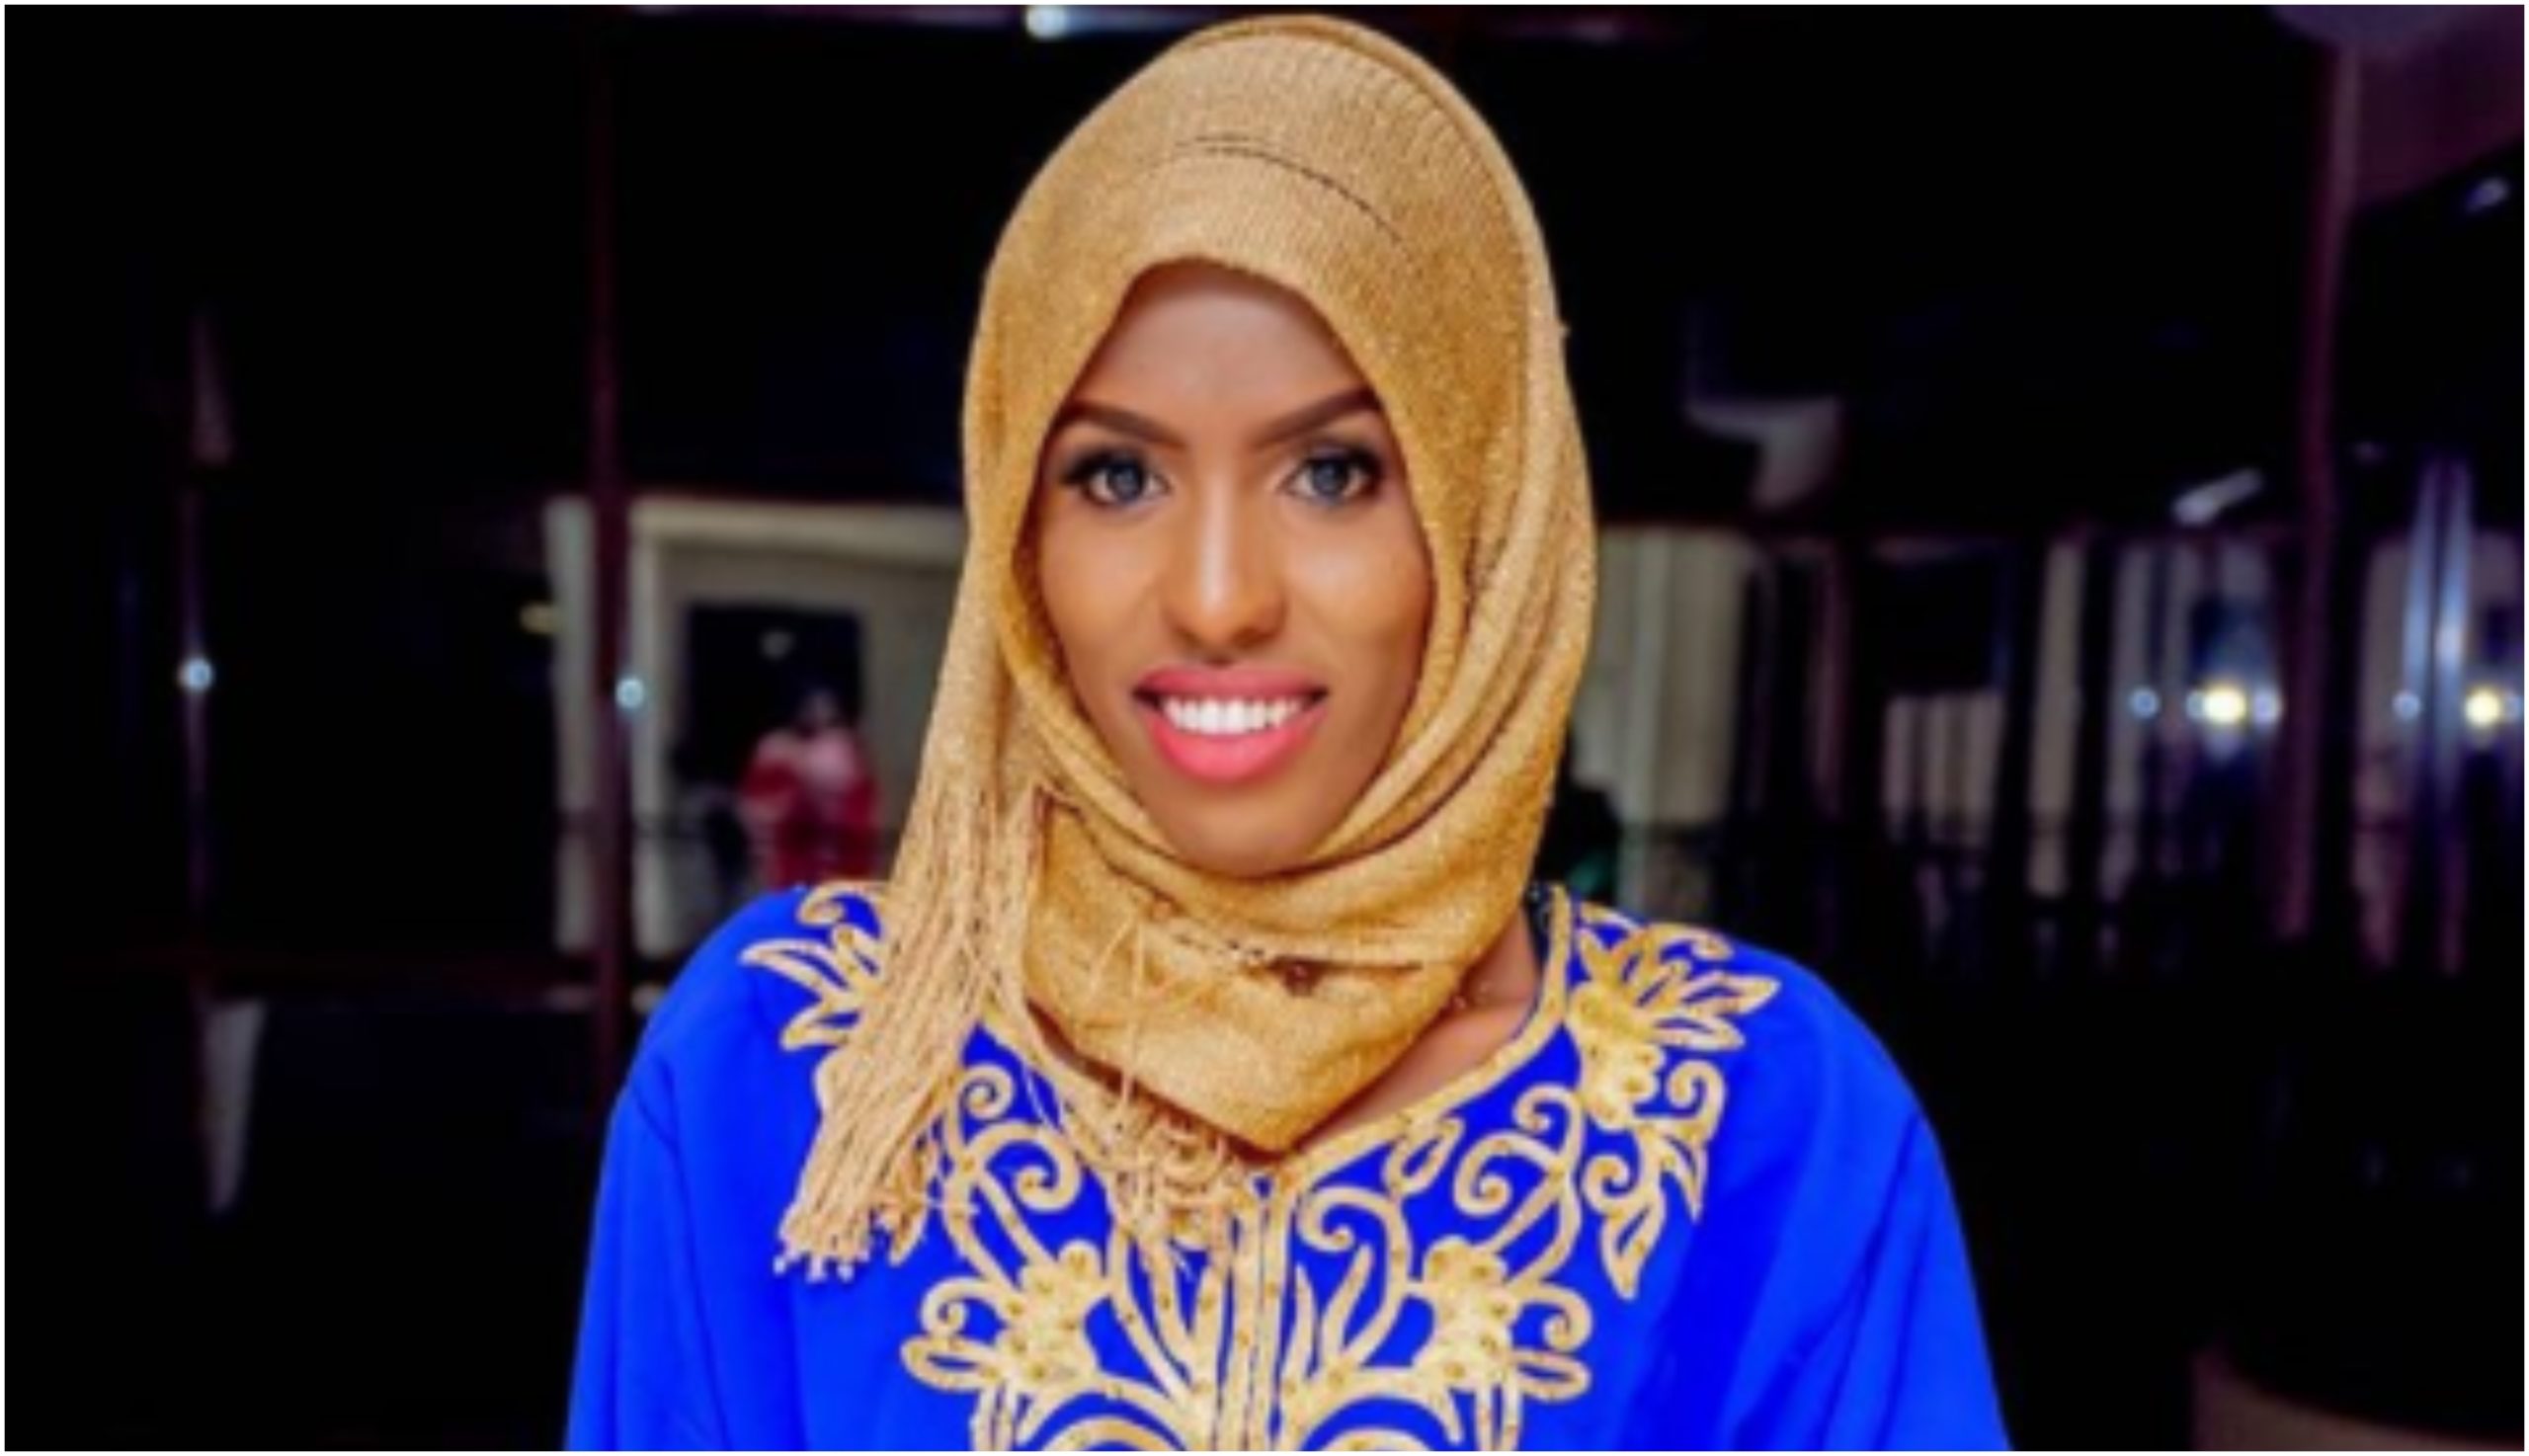 Churchill show’s Nasra Yusuf tearfully opens up on unsupportive father (Video)